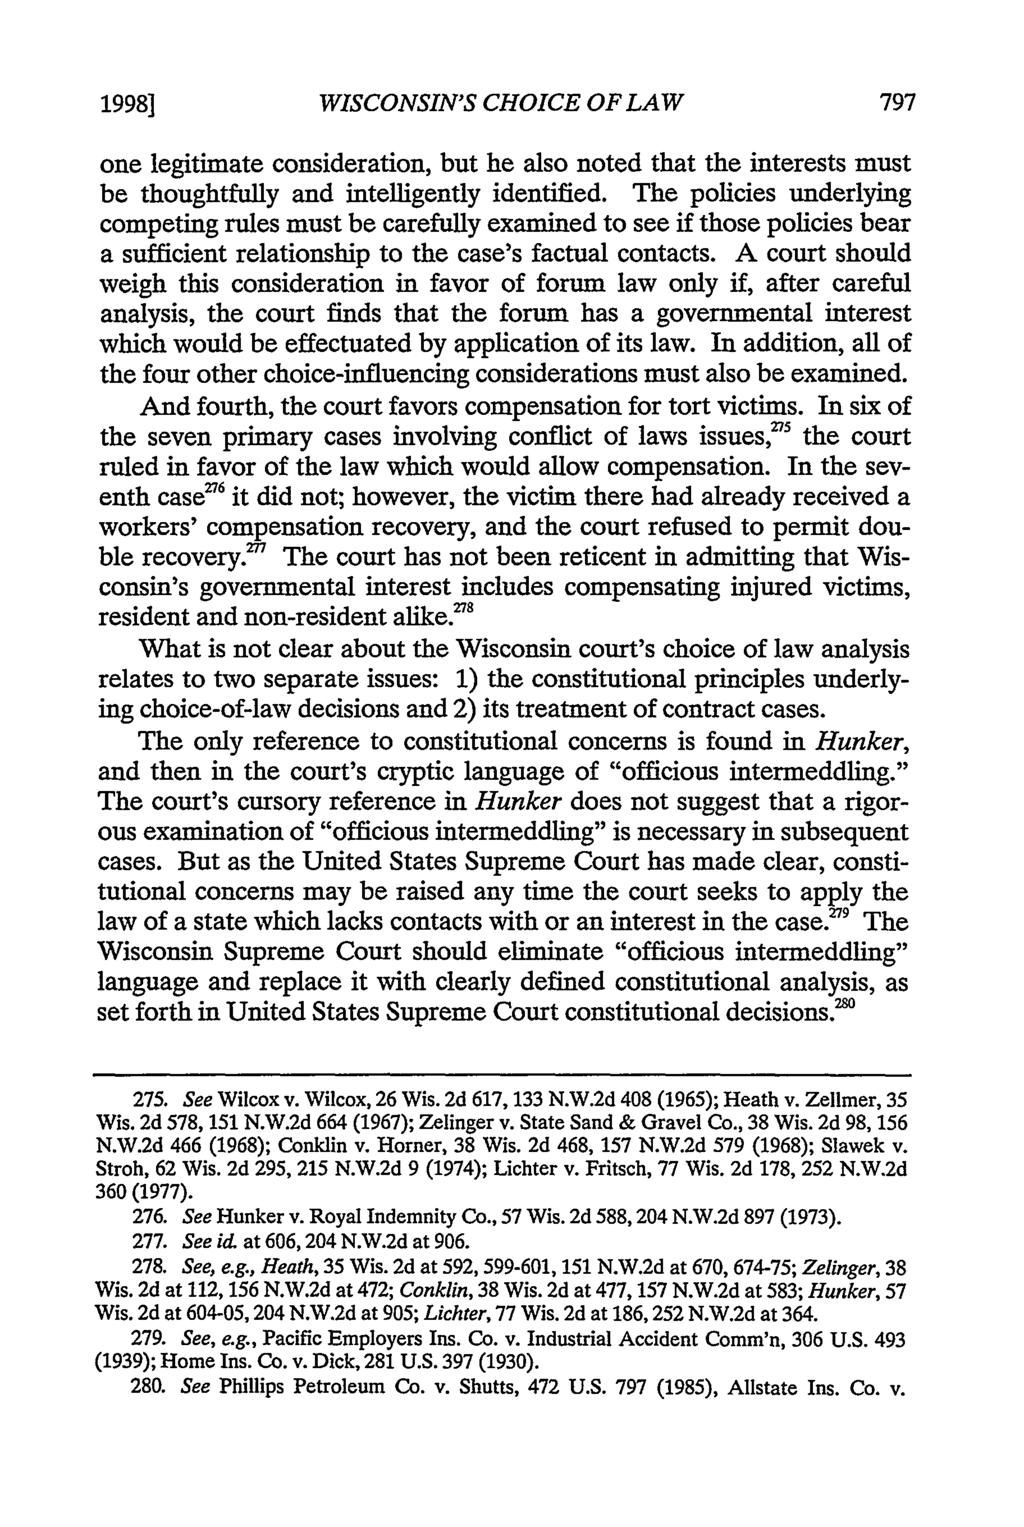 1998] WISCONSIN'S CHOICE OF LAW one legitimate consideration, but he also noted that the interests must be thoughtfully and intelligently identified.